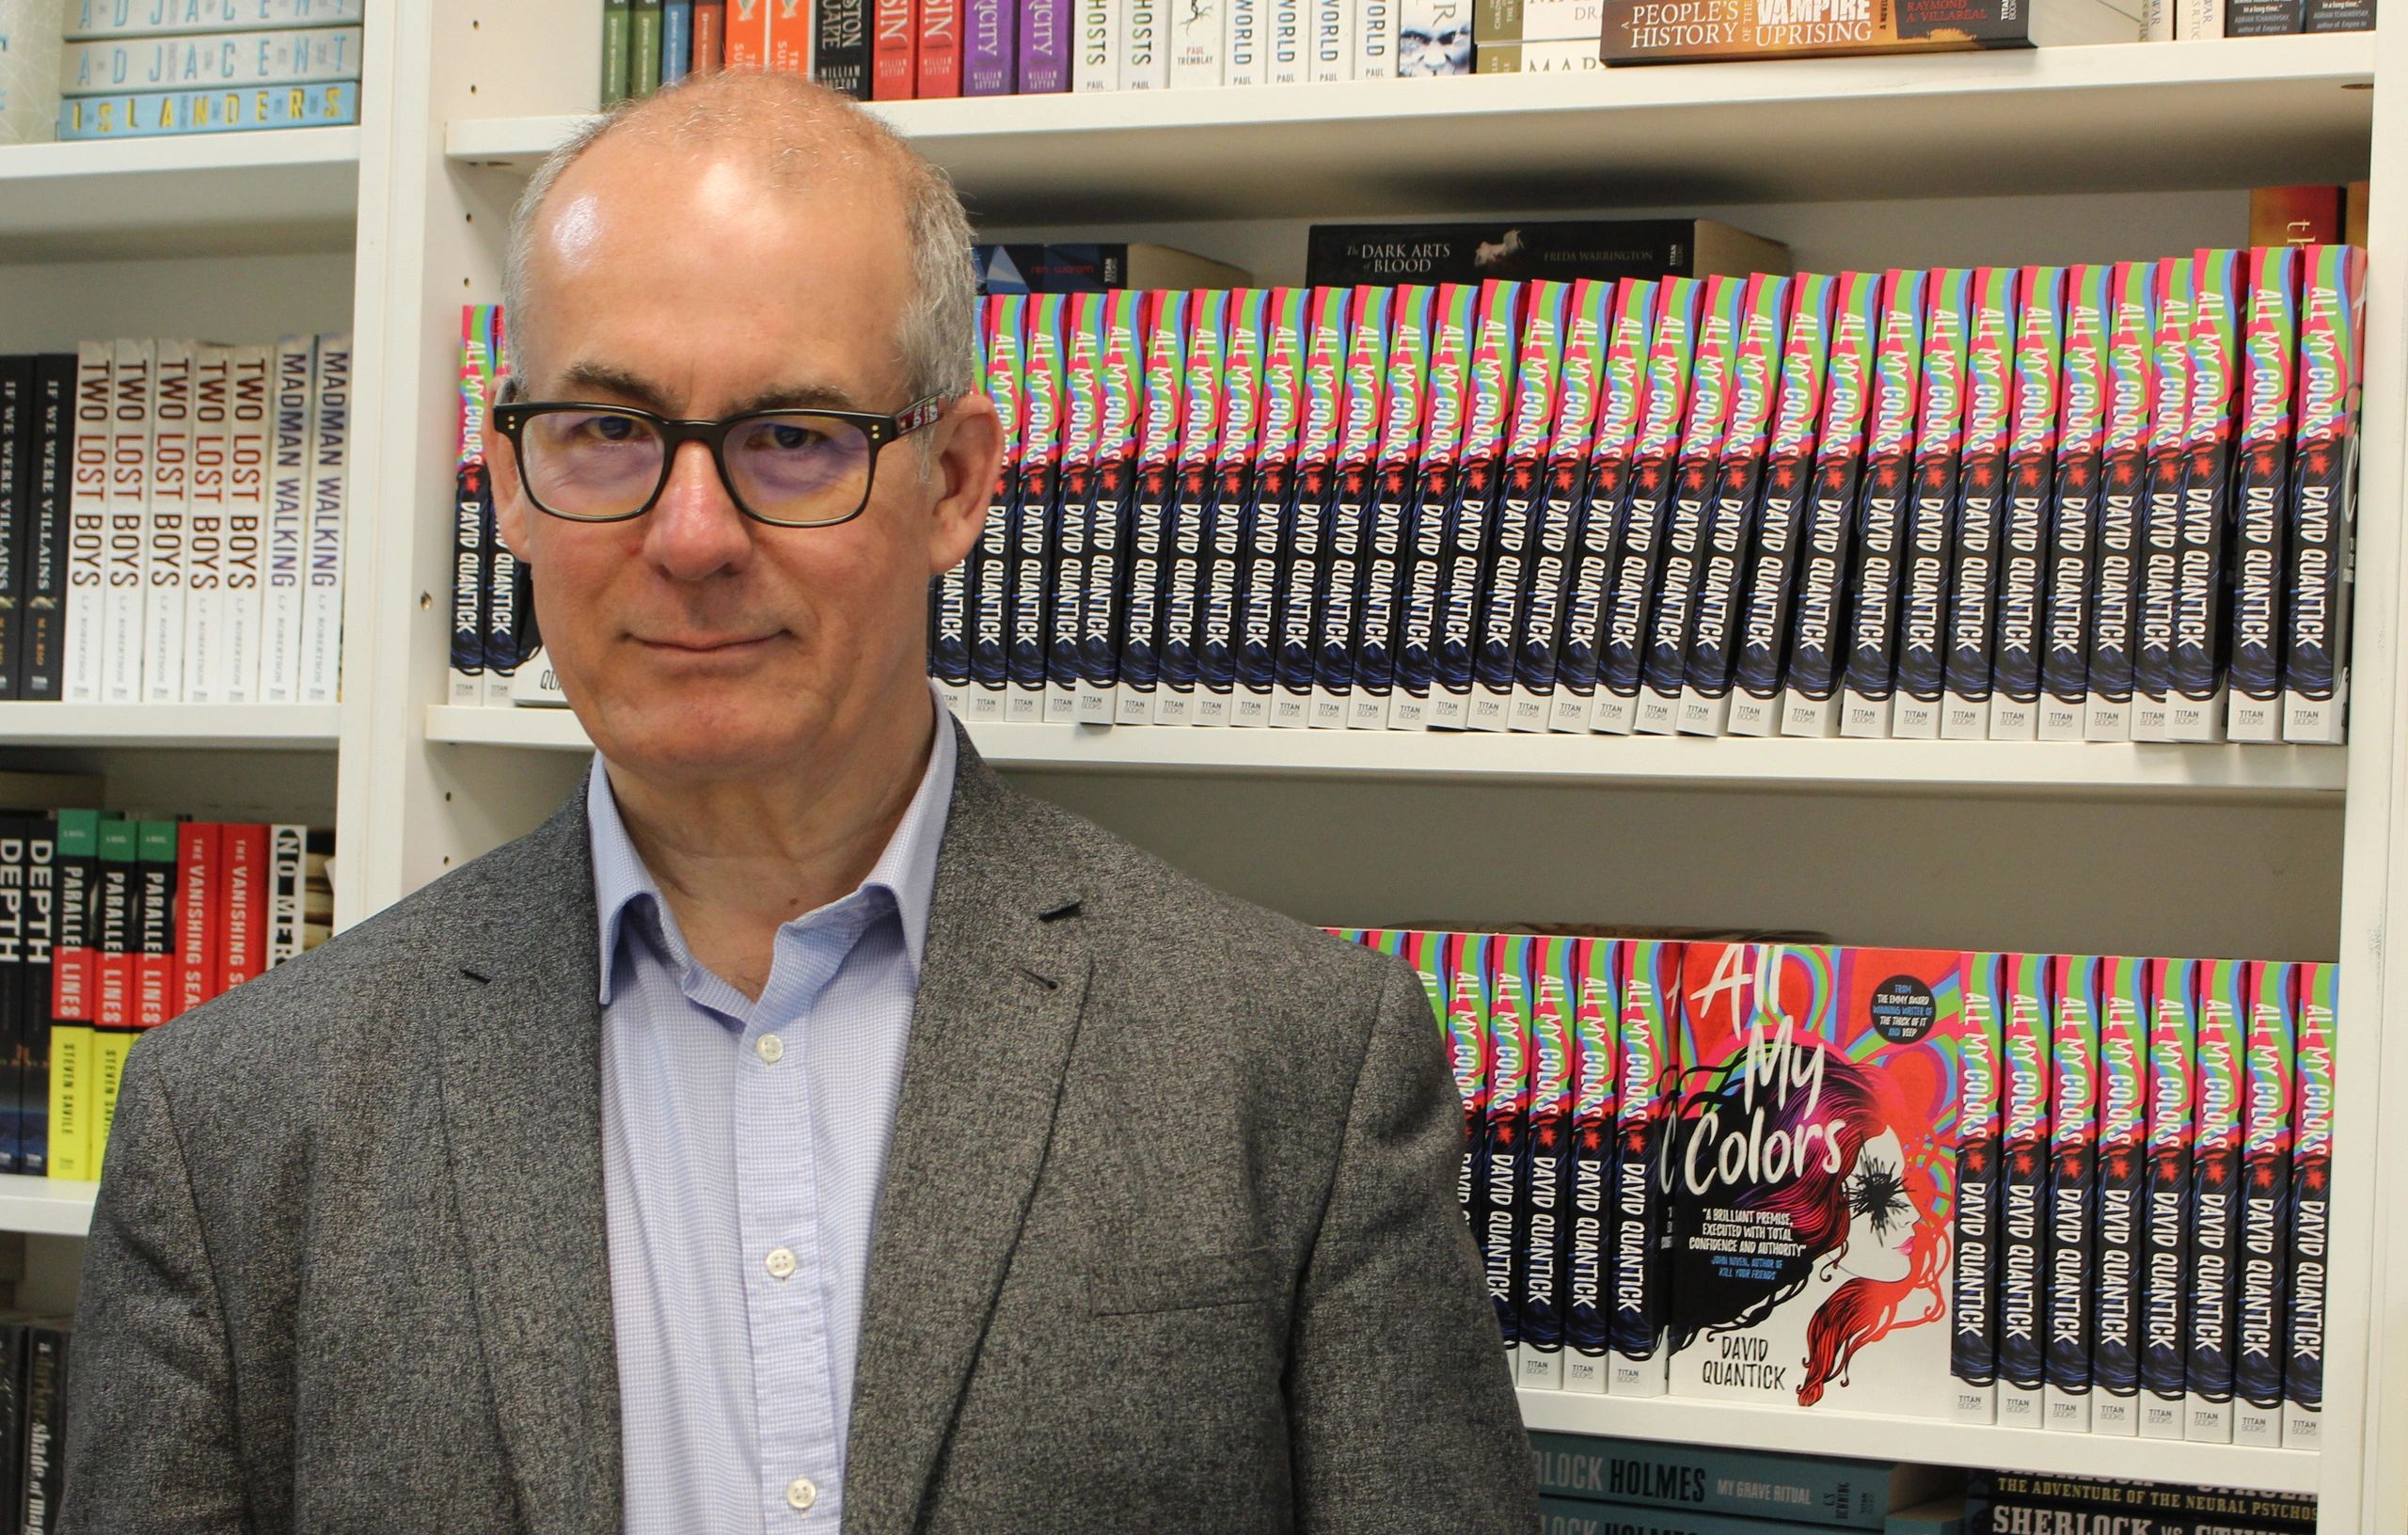 The official website for David Quantick, his books and everything